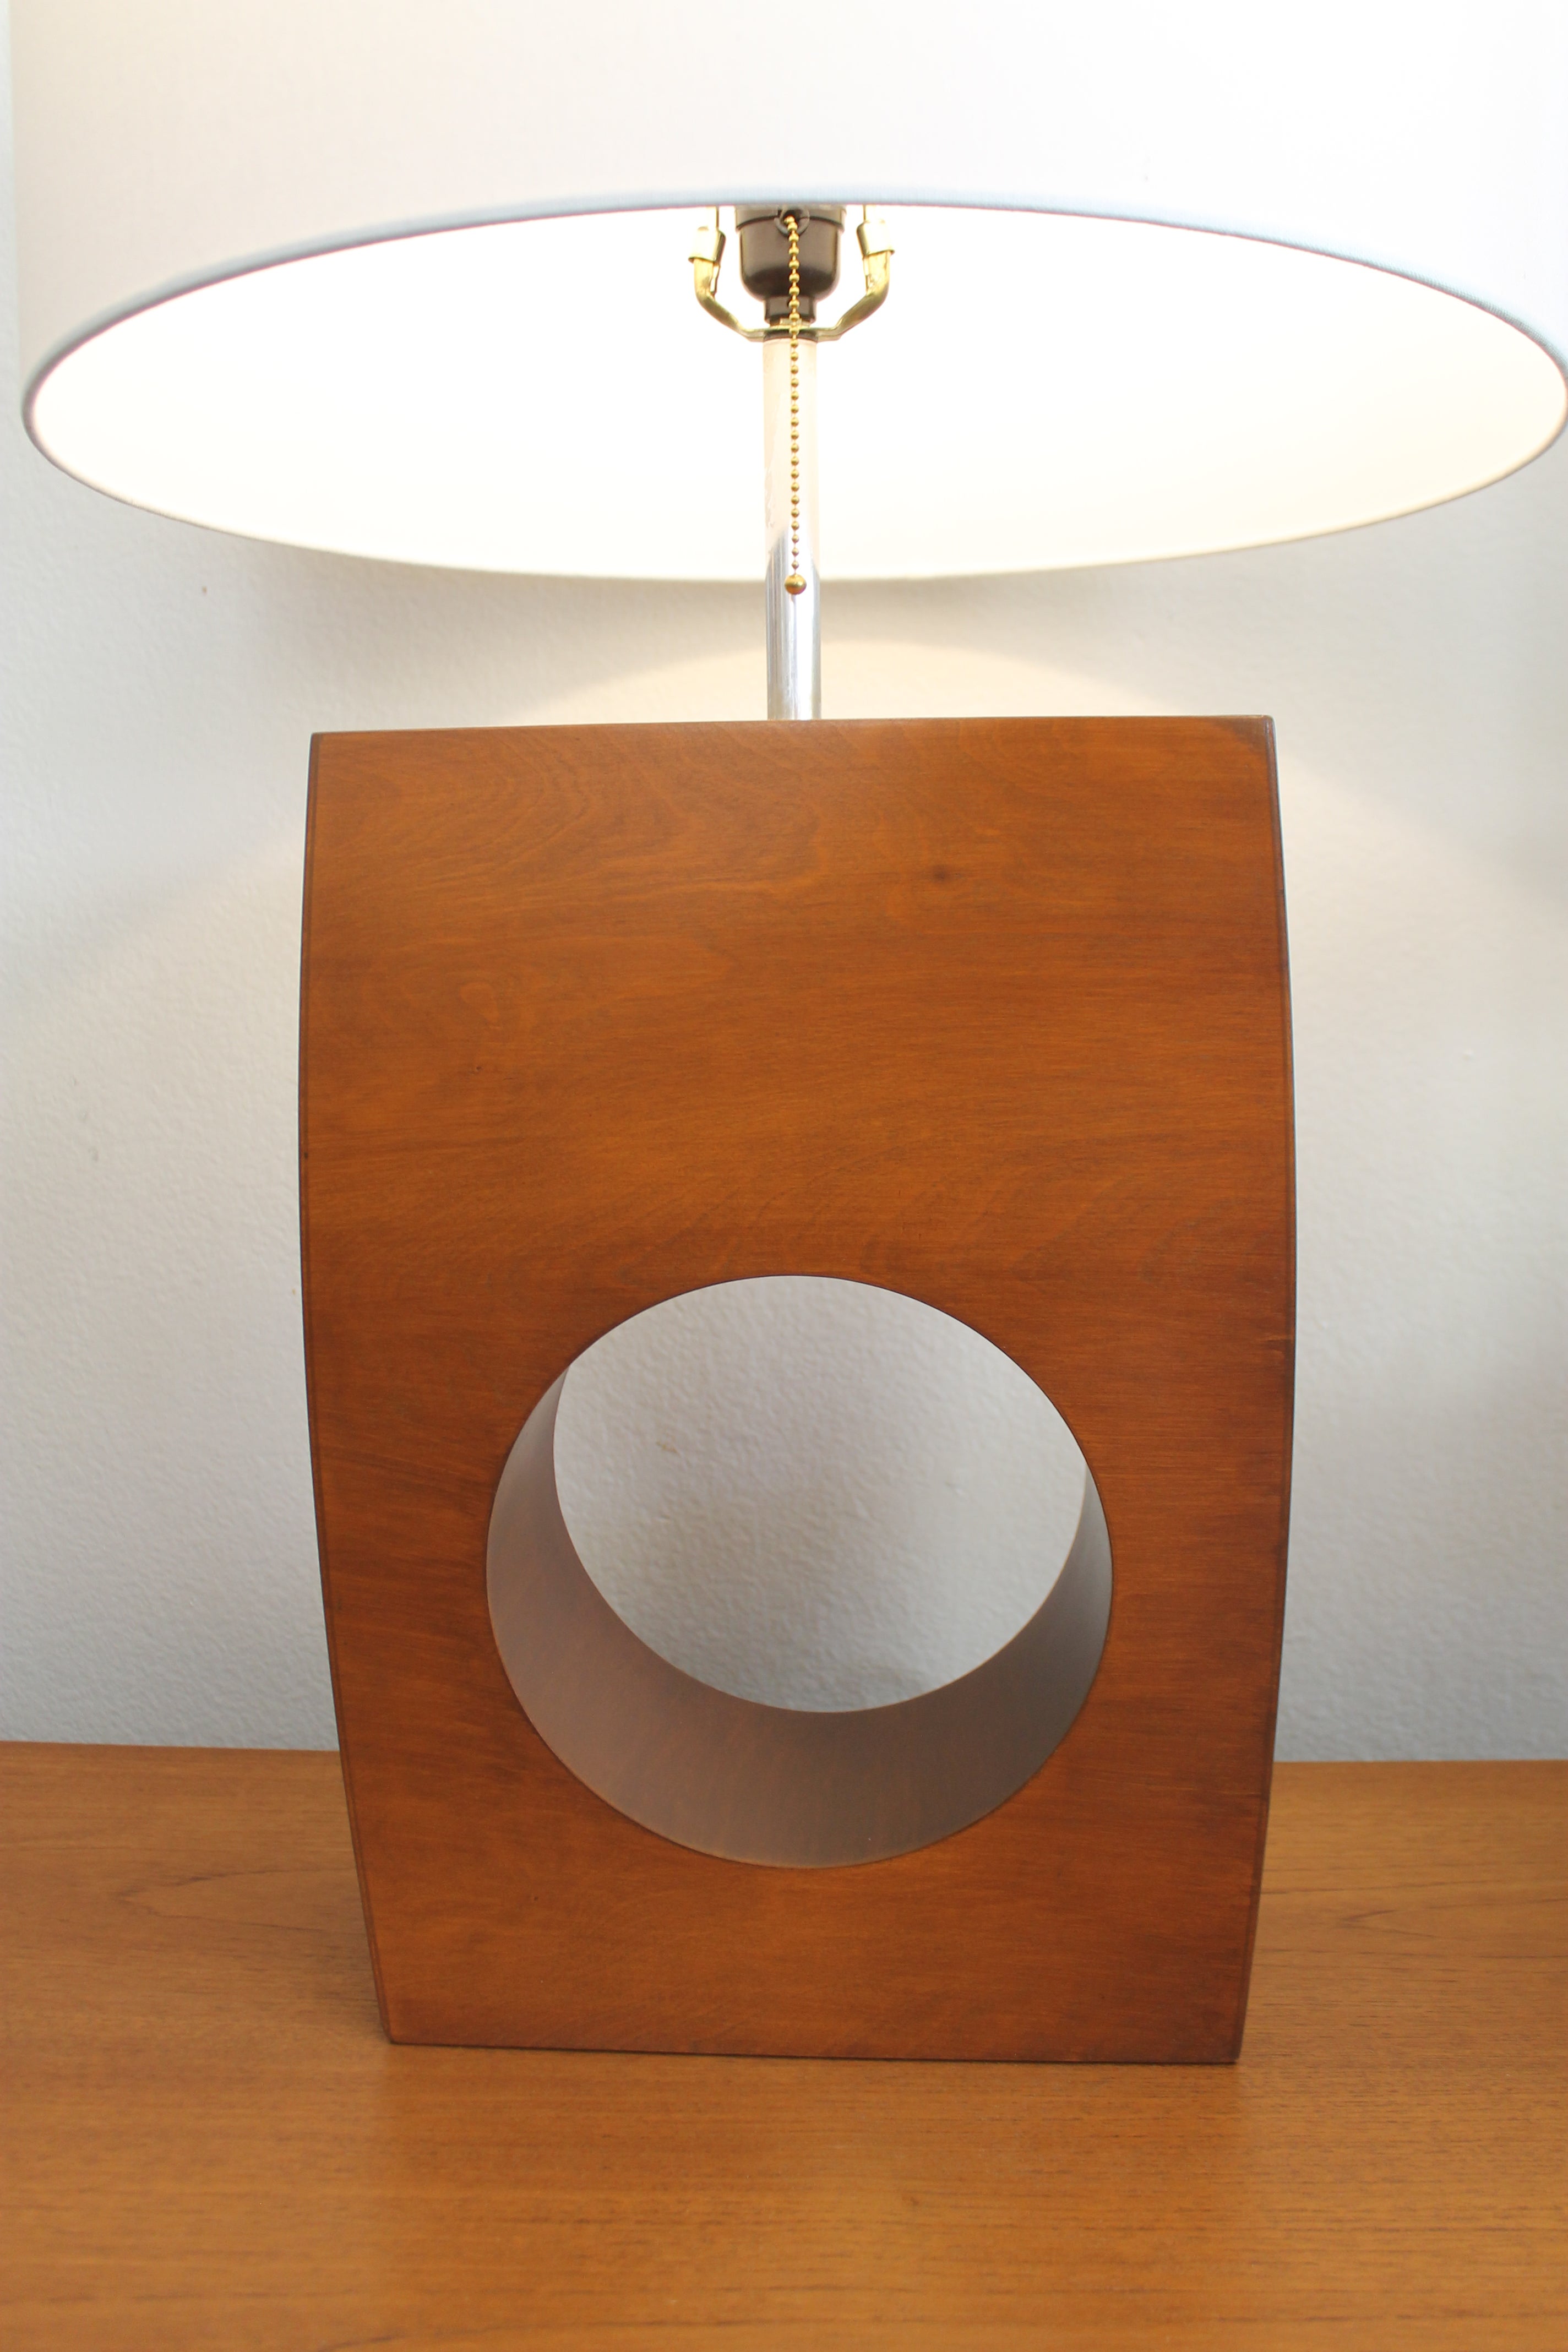 Table lamp by the Modeline Lamp Company. We call it a donut hole lamp. Lamp measures 13